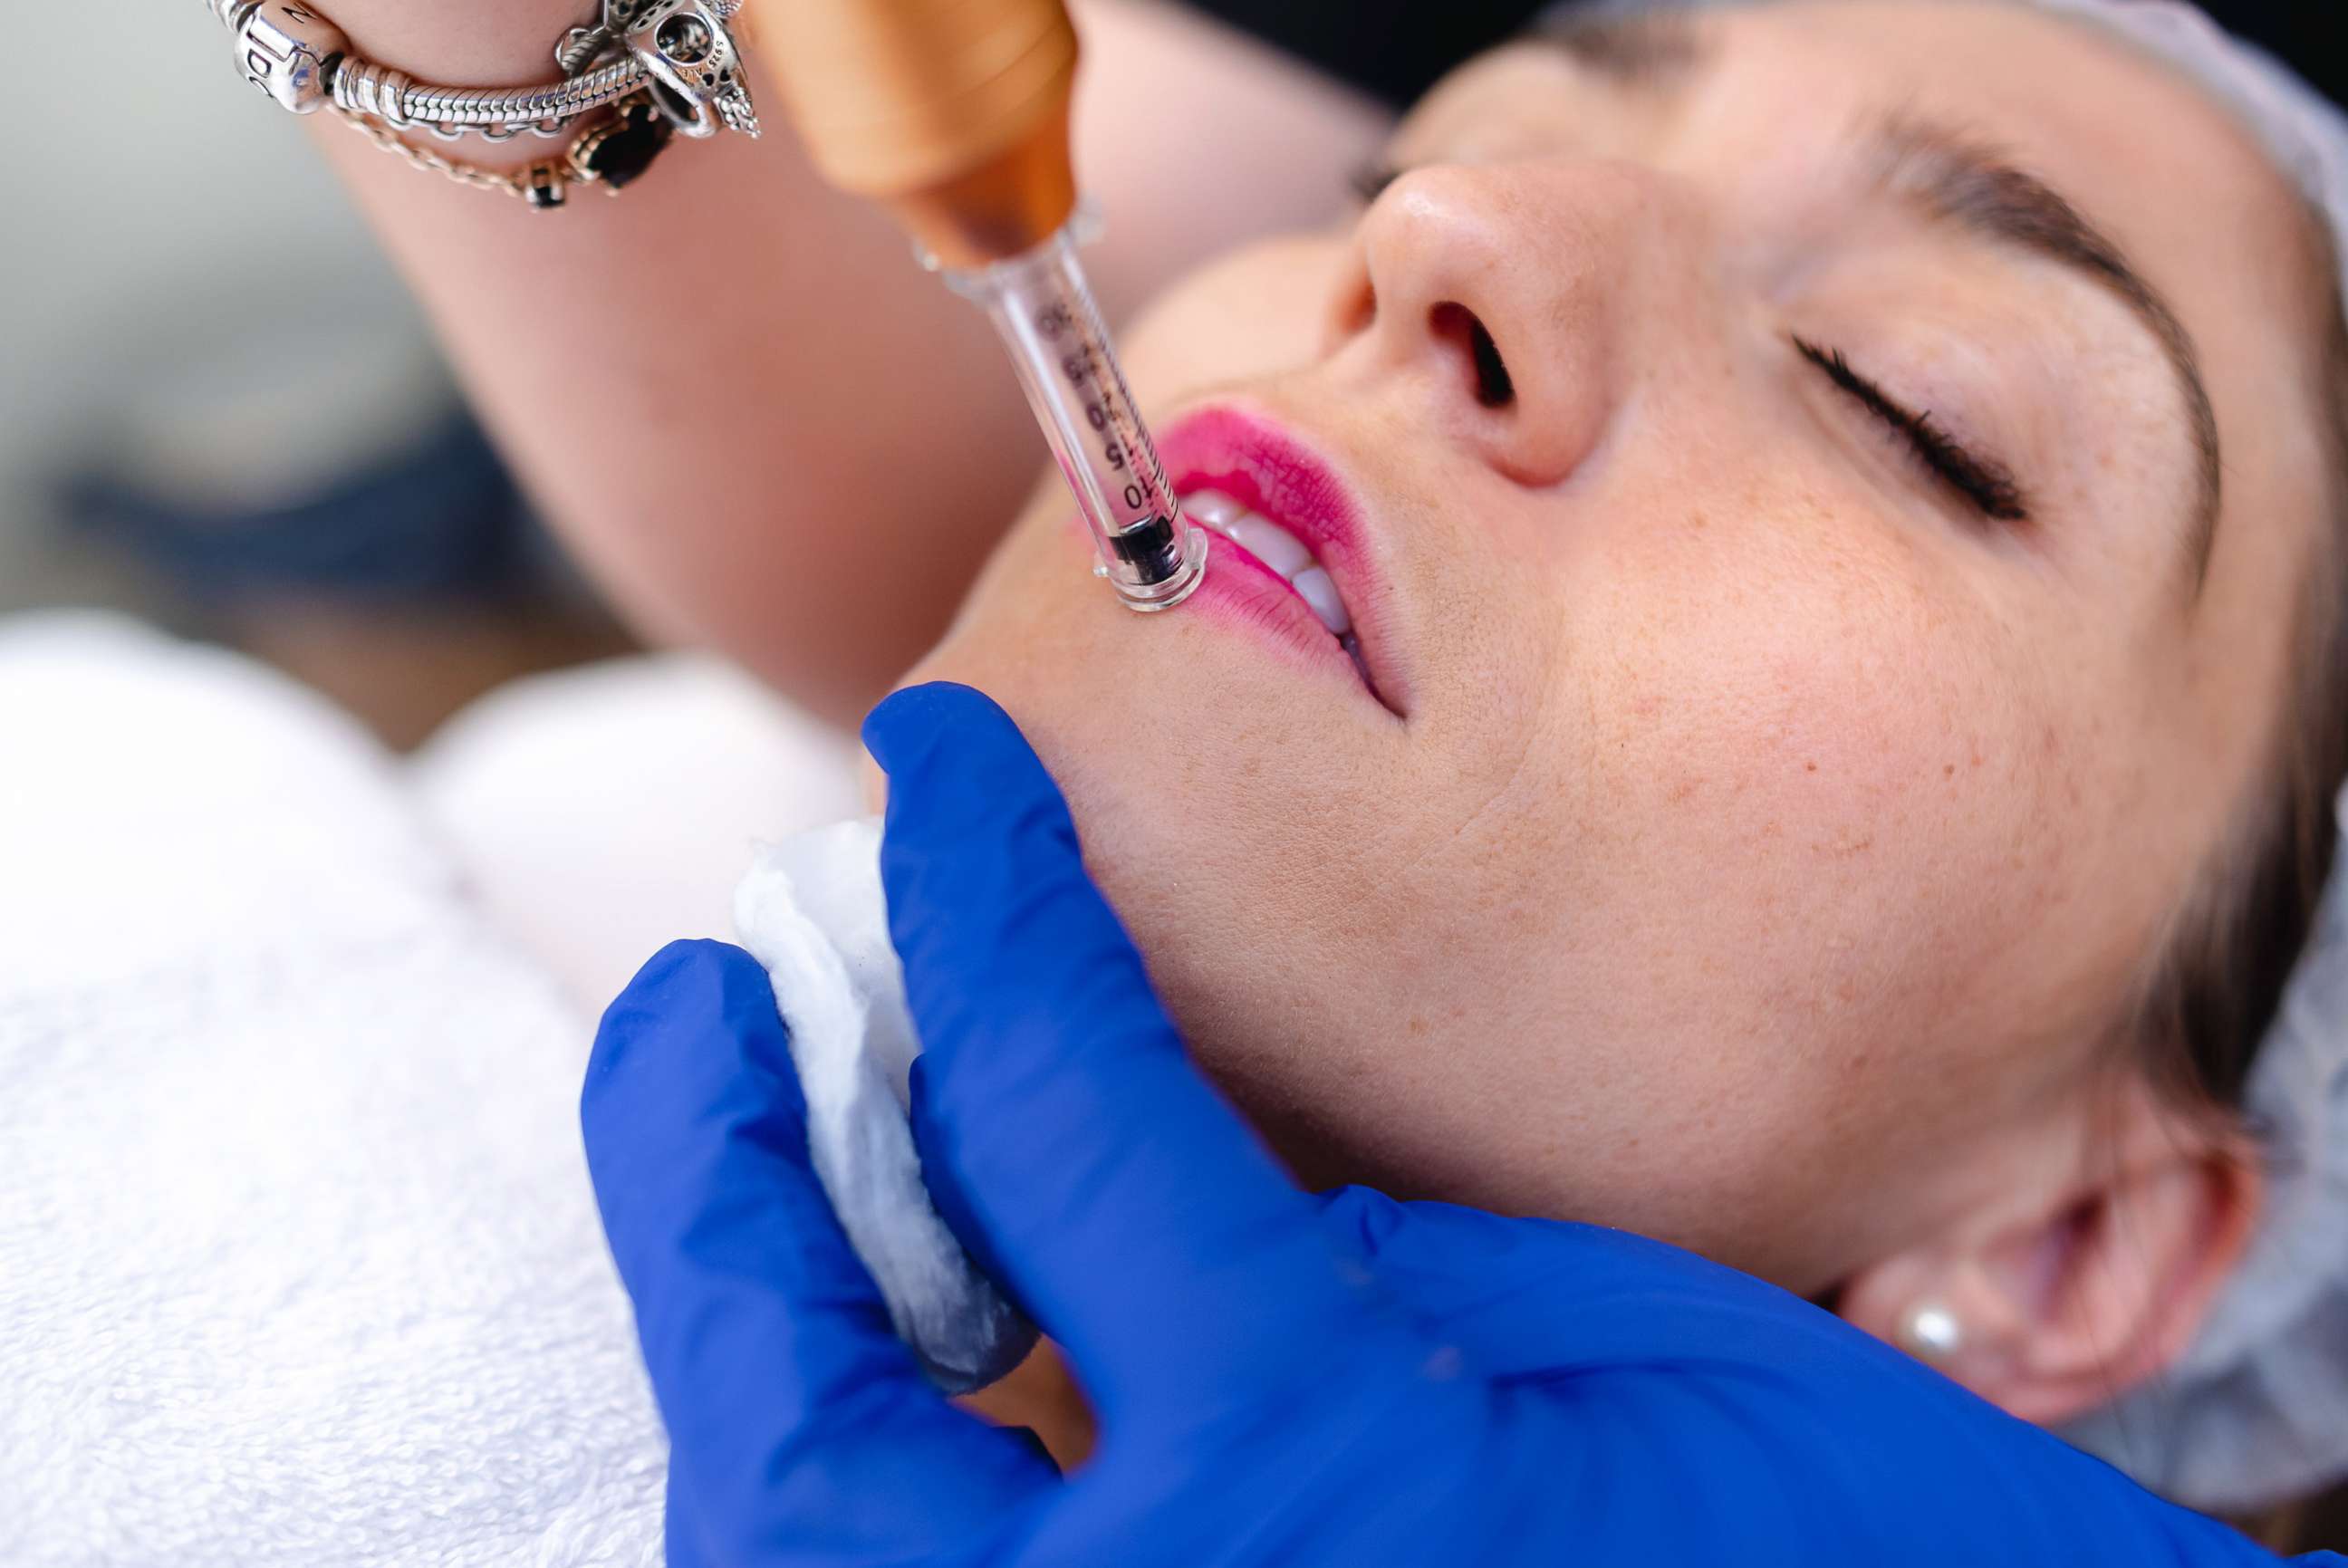 PHOTO: A woman receives hyaluronic acid cosmetic treatment on her lips in this stock image.